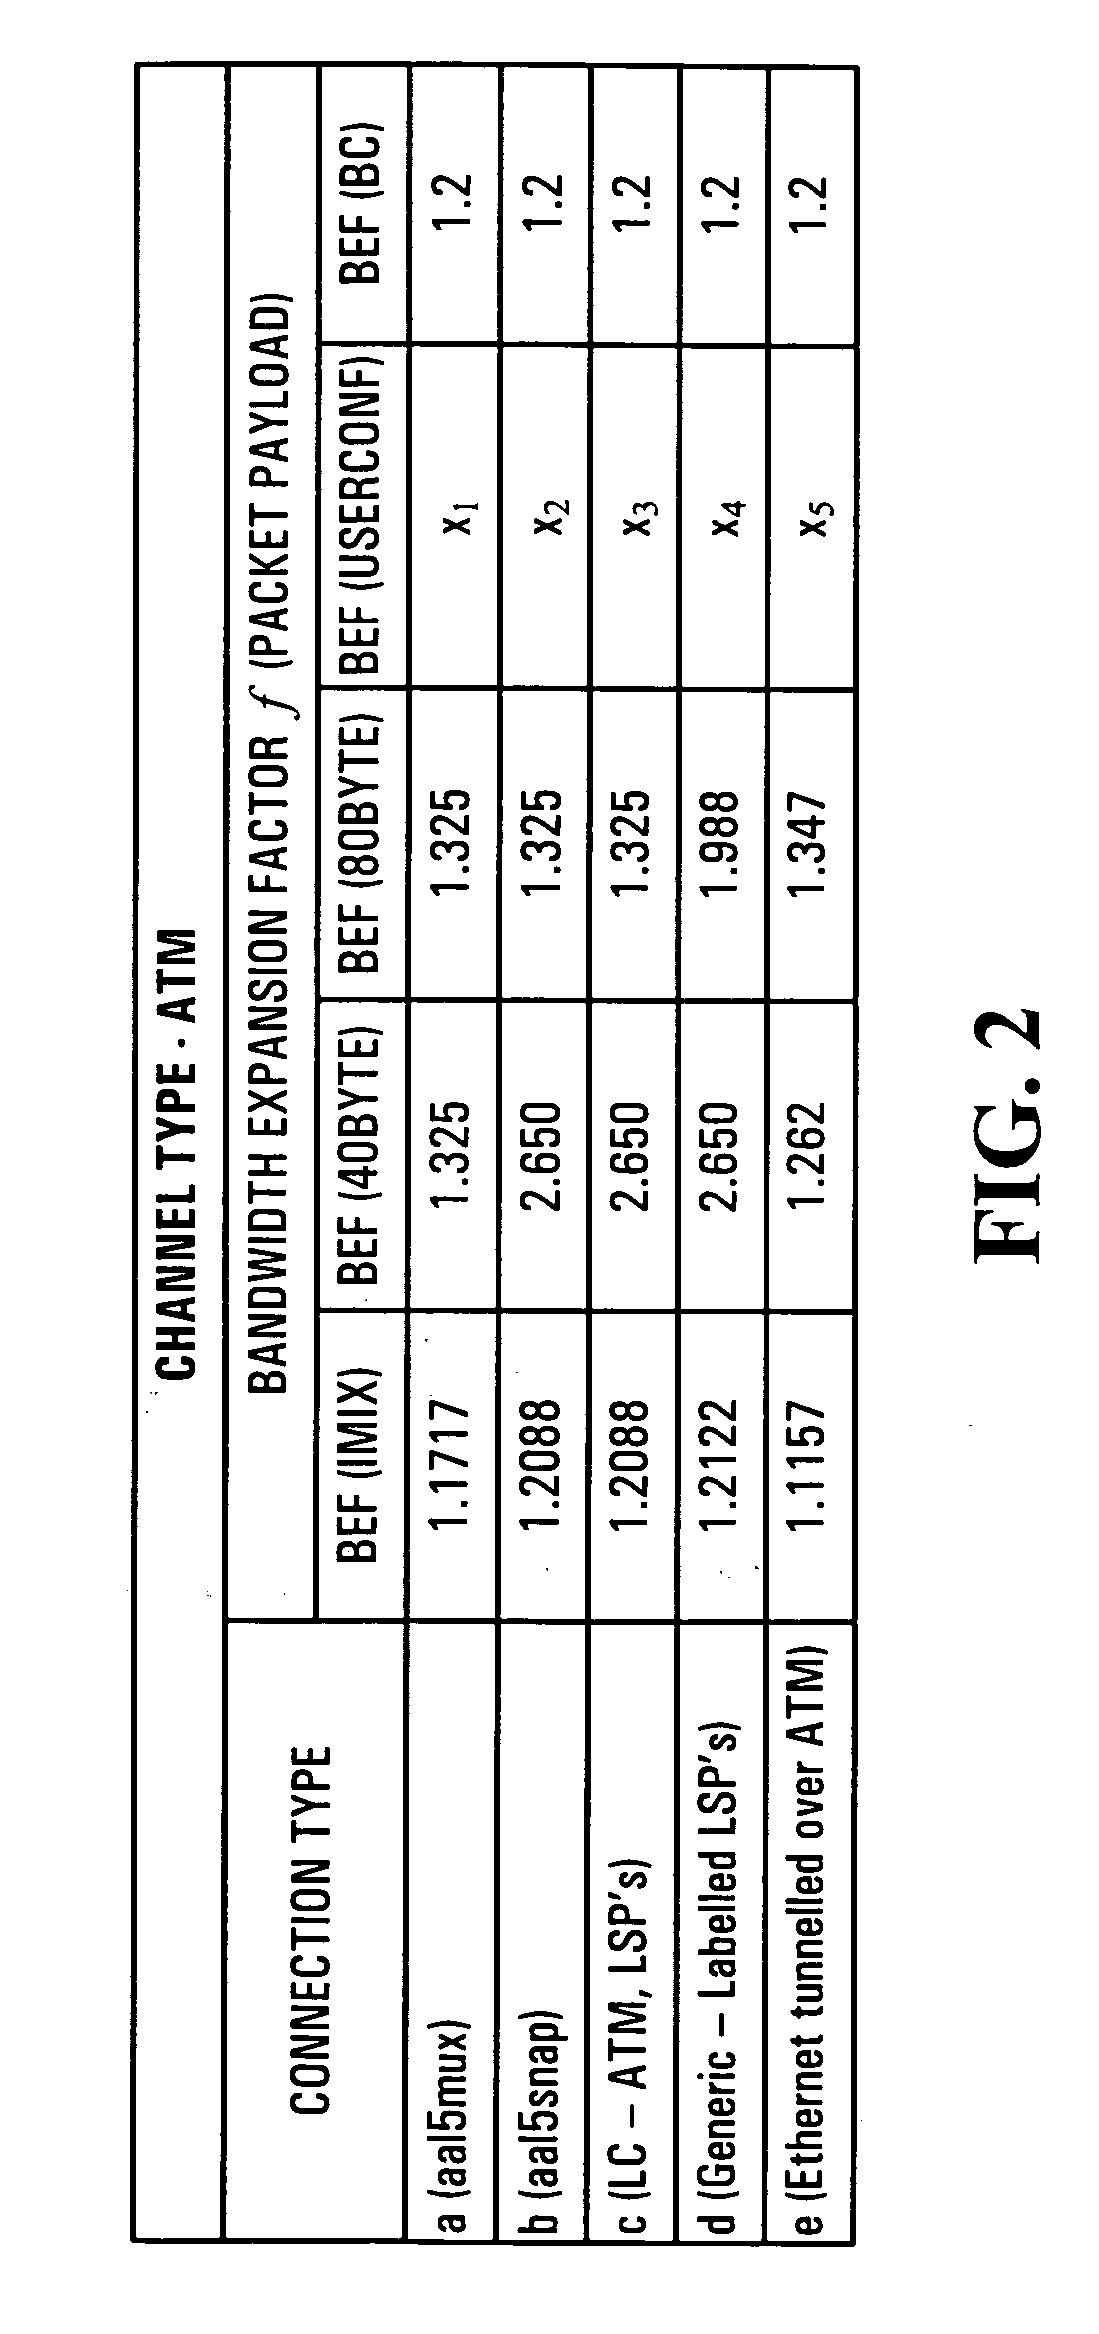 Method and apparatus for controlling connections in a communication network